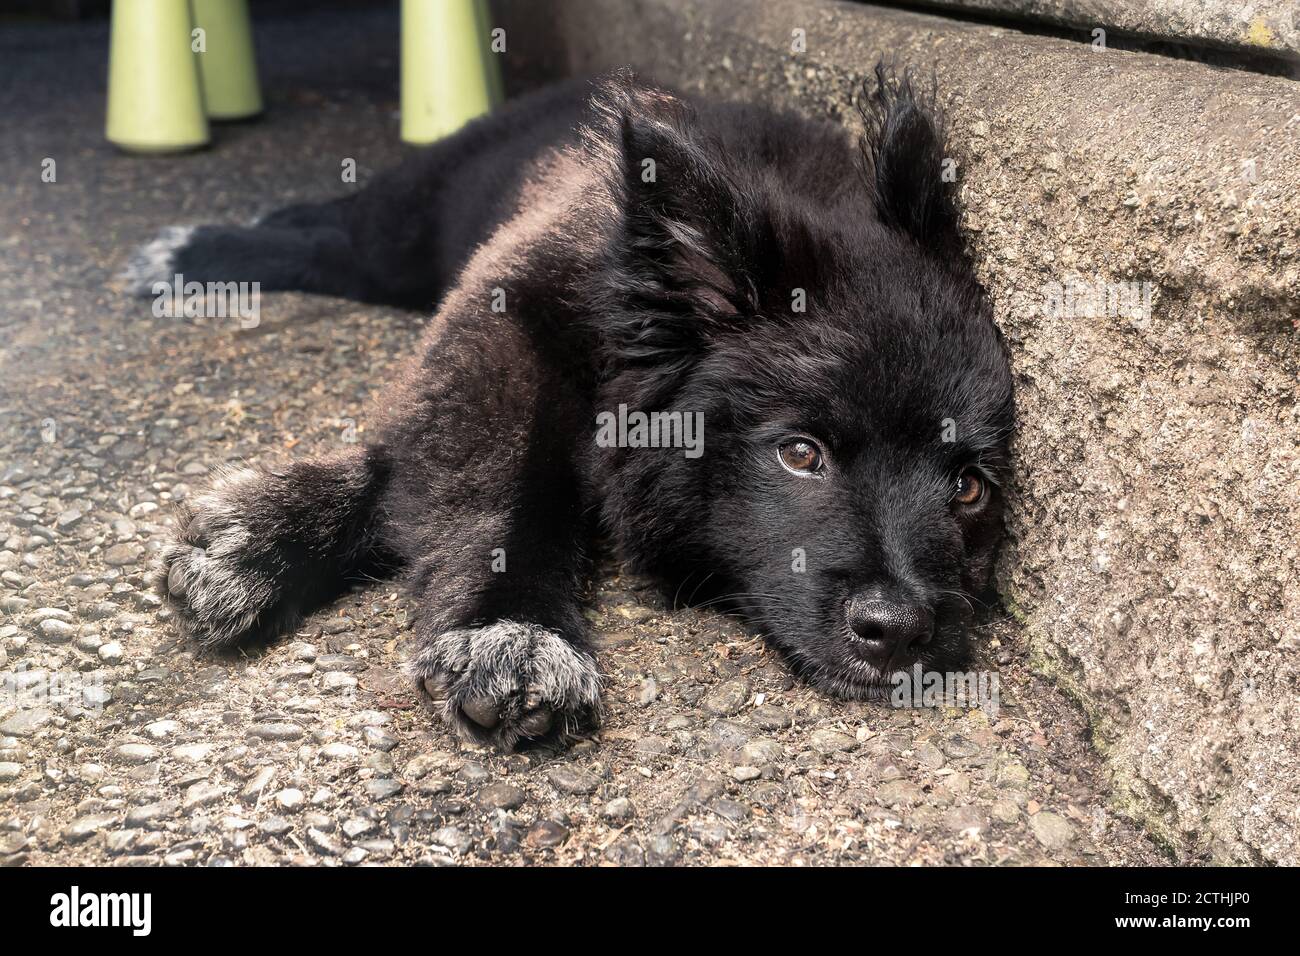 Black puppy dog stretched out and resting after playing and running around. 12 week old male Australian Shepherd x Keeshond puppy. Super fluffy ears. Stock Photo